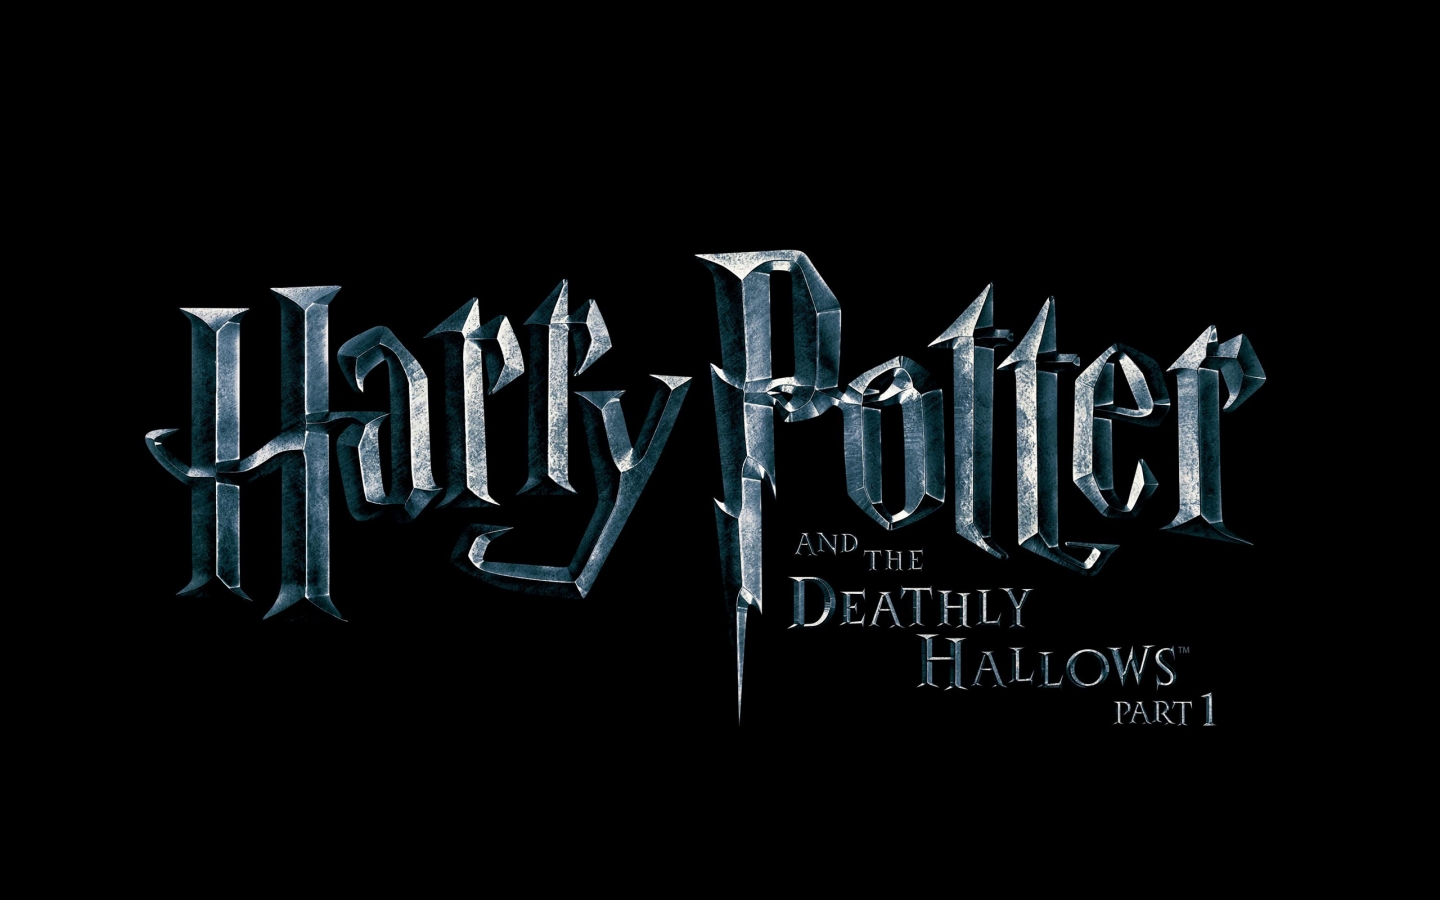 Potter And The Deathly Hallows - HD Wallpaper 